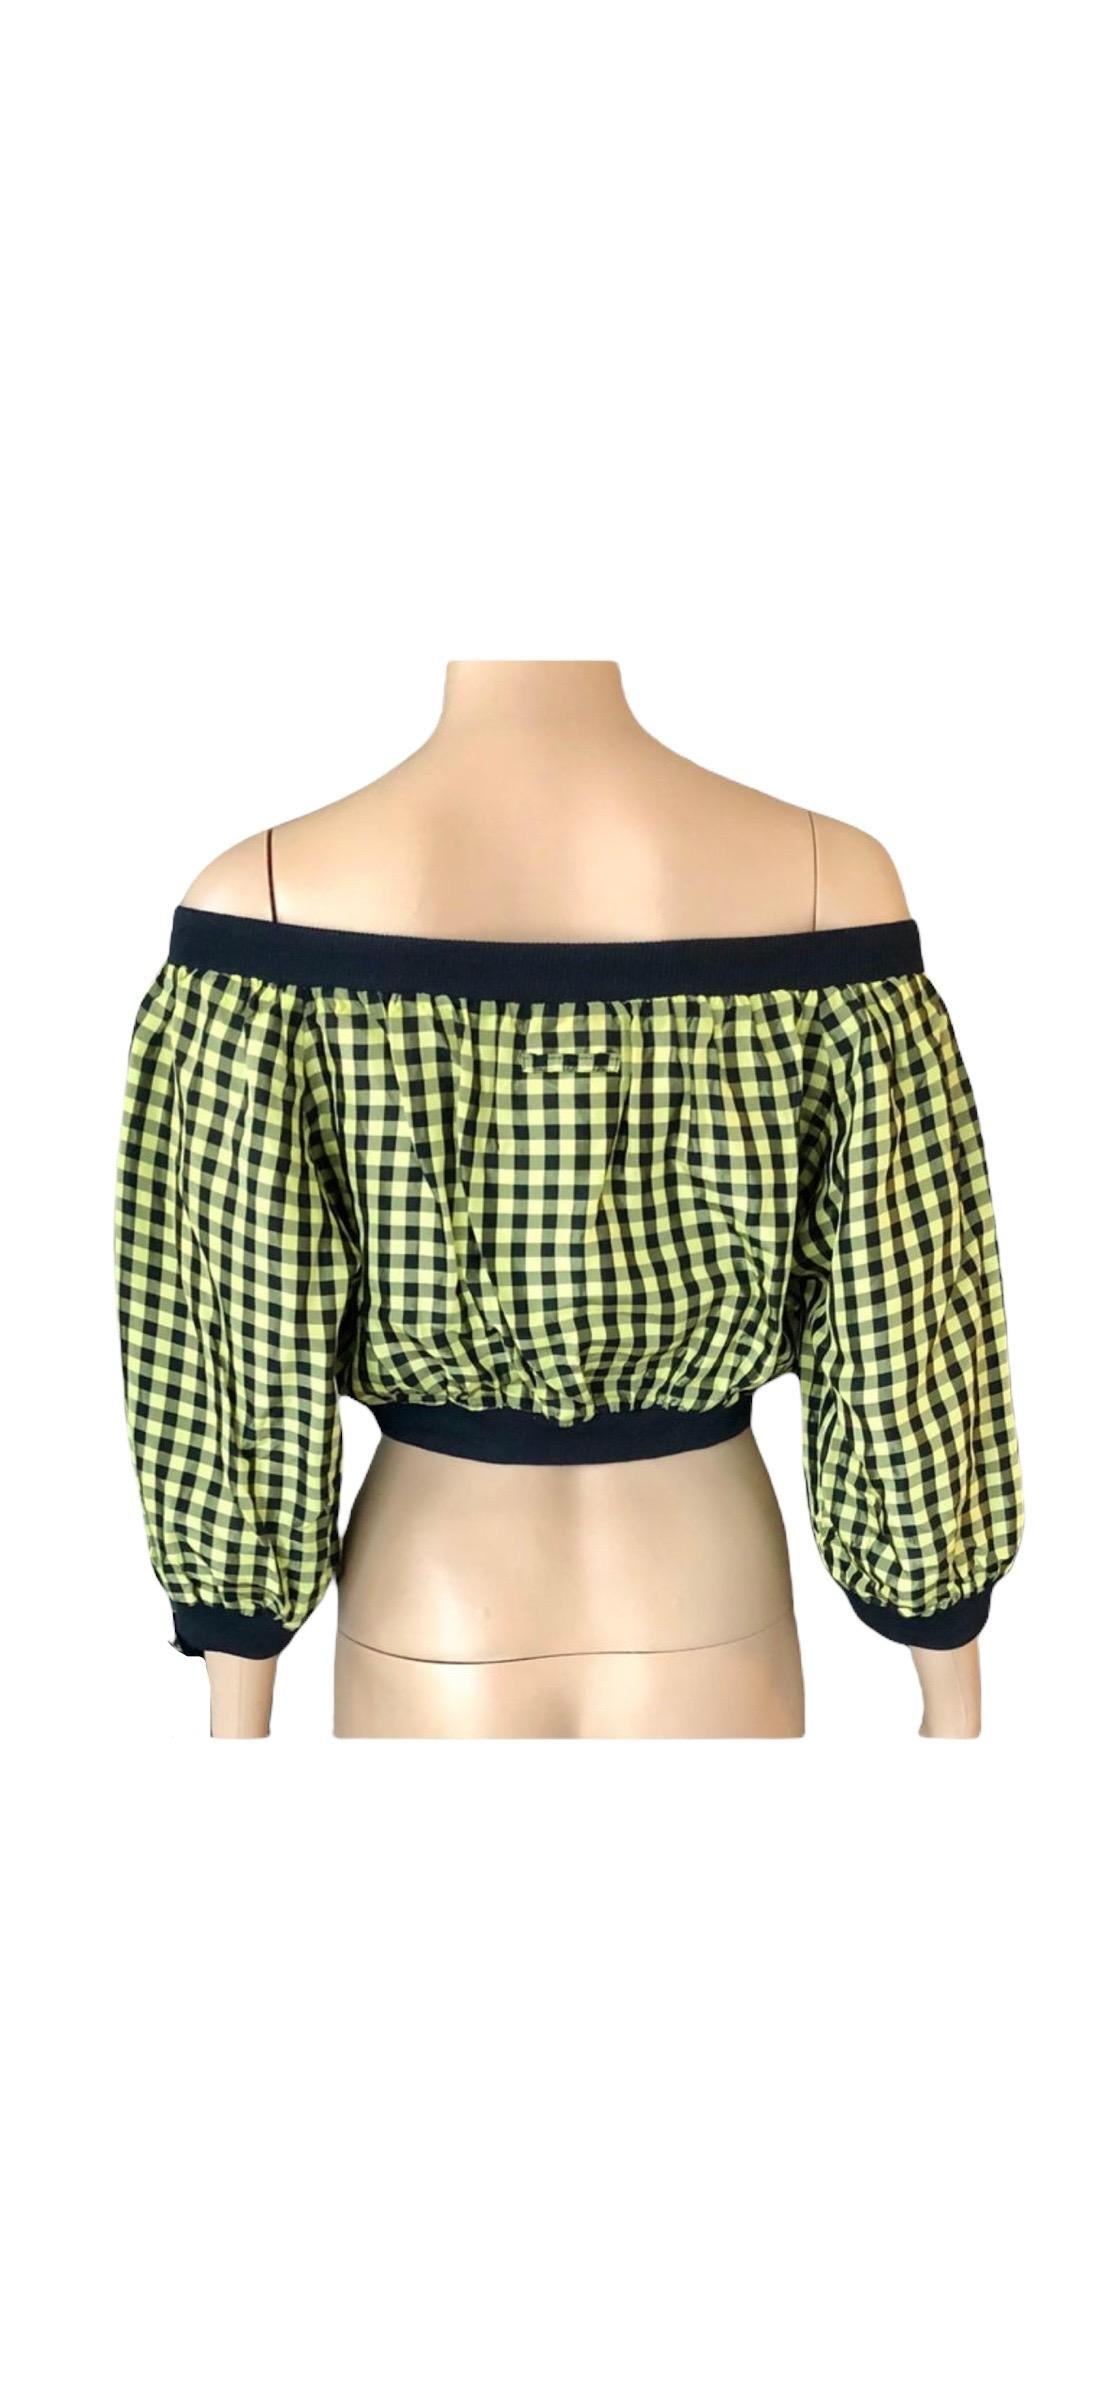 Jean Paul Gaultier c. 1980 Vintage Clueless Crop Top For Sale at 1stDibs